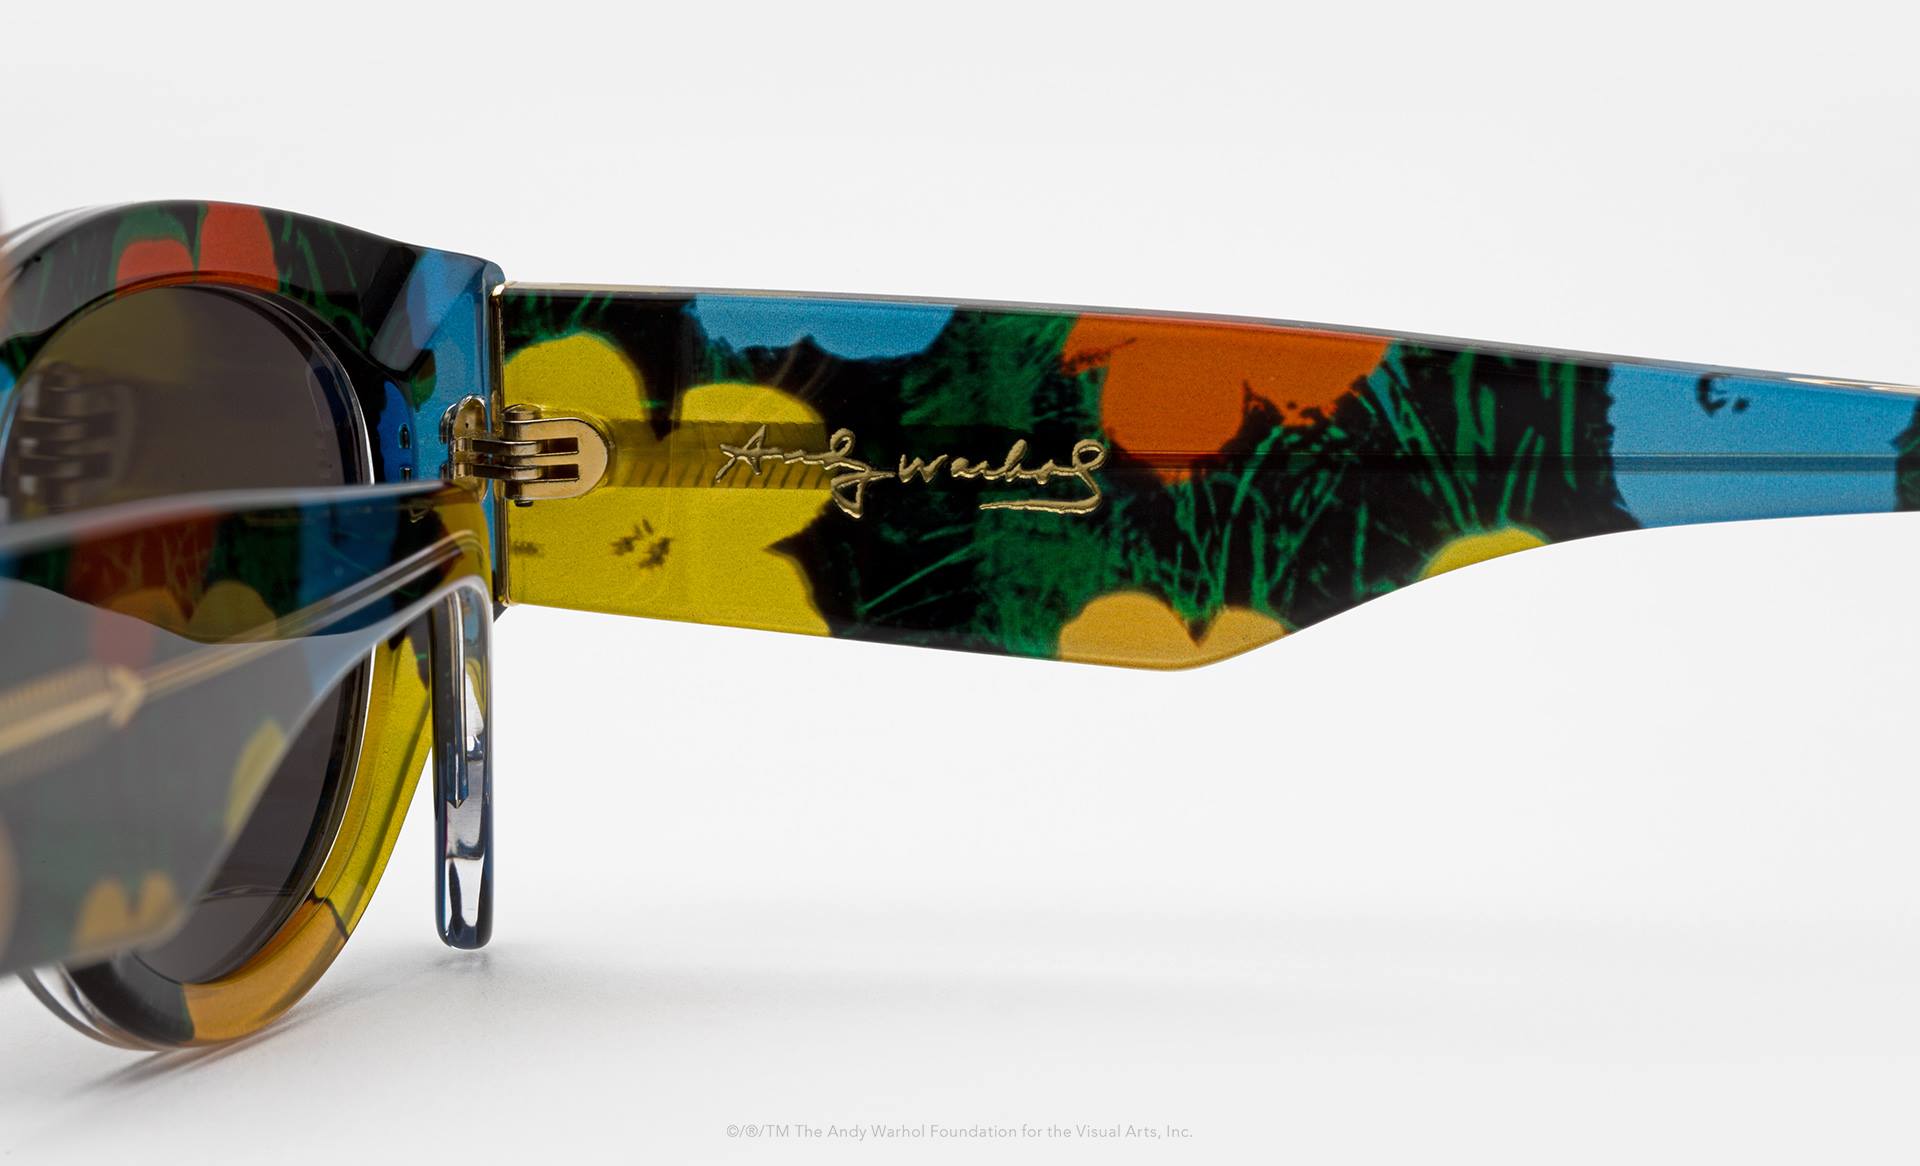 The Latest SUPER x Andy Warhol Sunglasses Designs Are Here Shop Buy Online Latest Collaboration